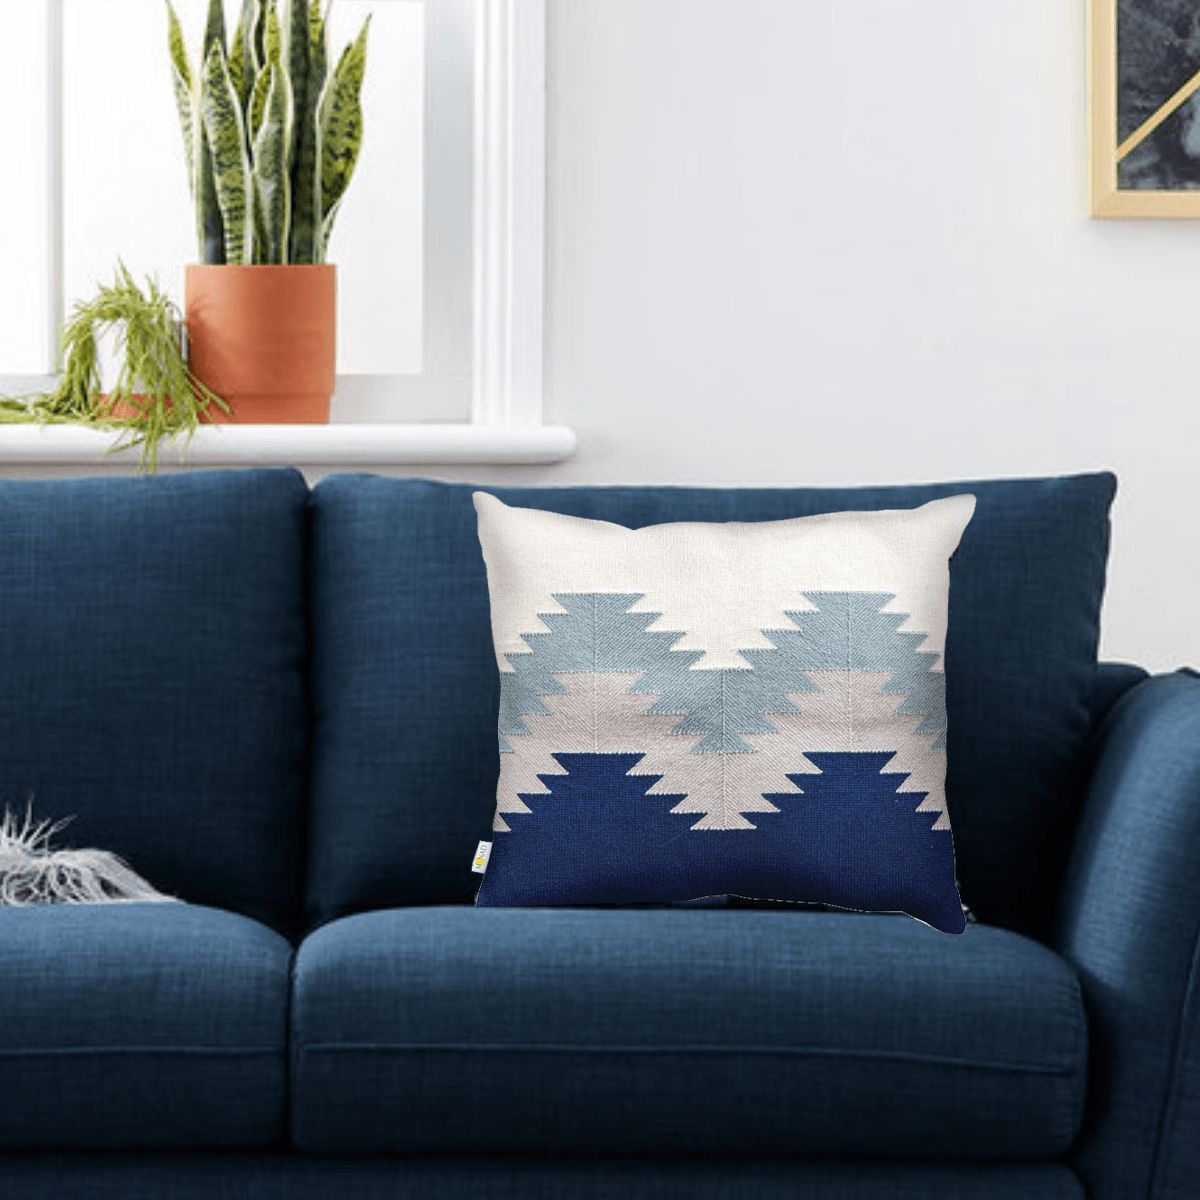 Aztec Pattern Embroidered Cushion Cover